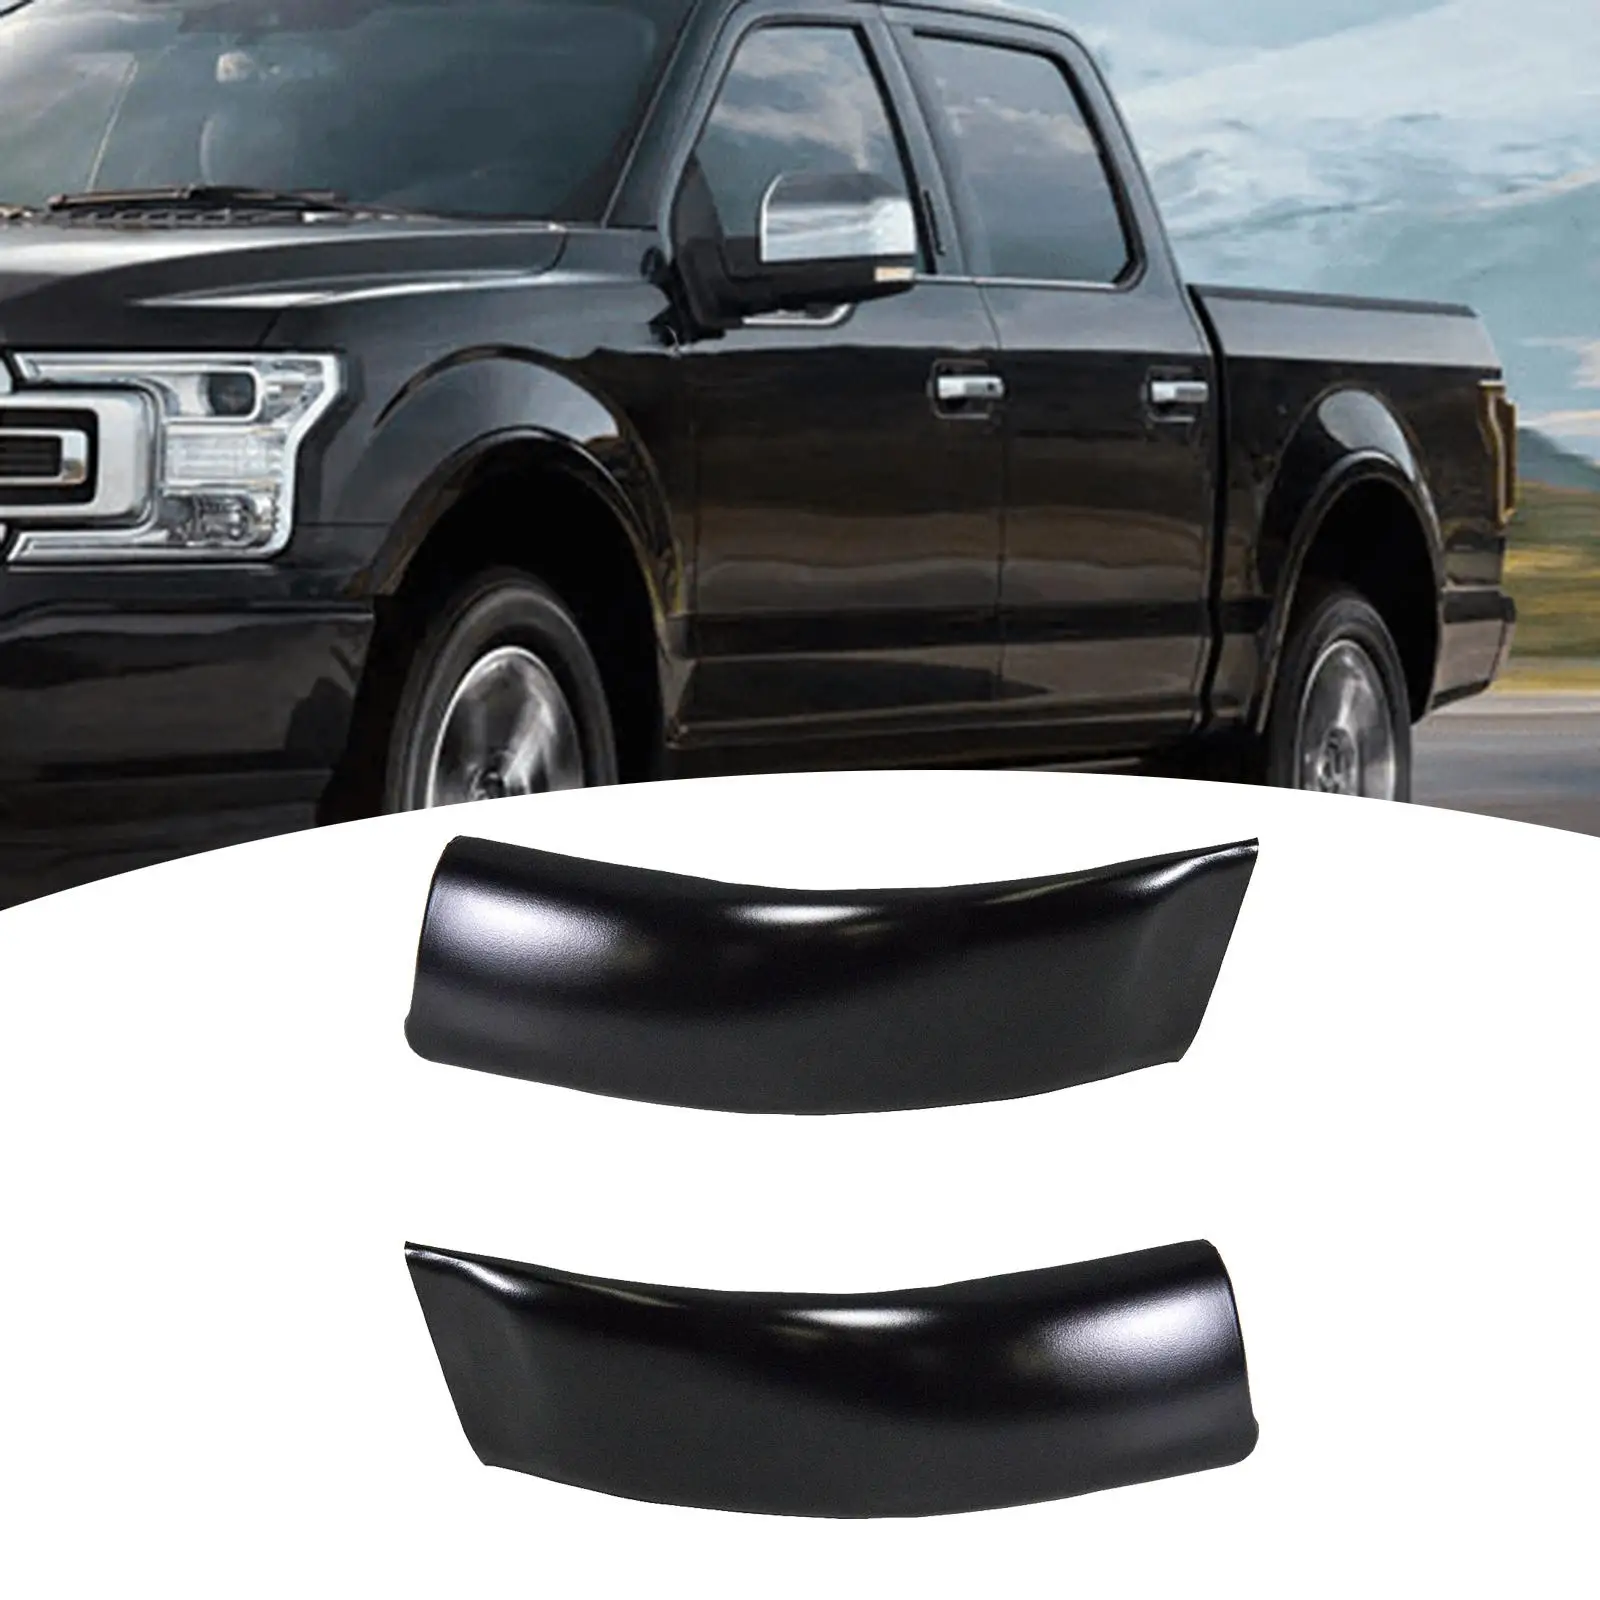 Roof Molding Side Trim Set Assembly Replaces for Ford F250 F450 F550